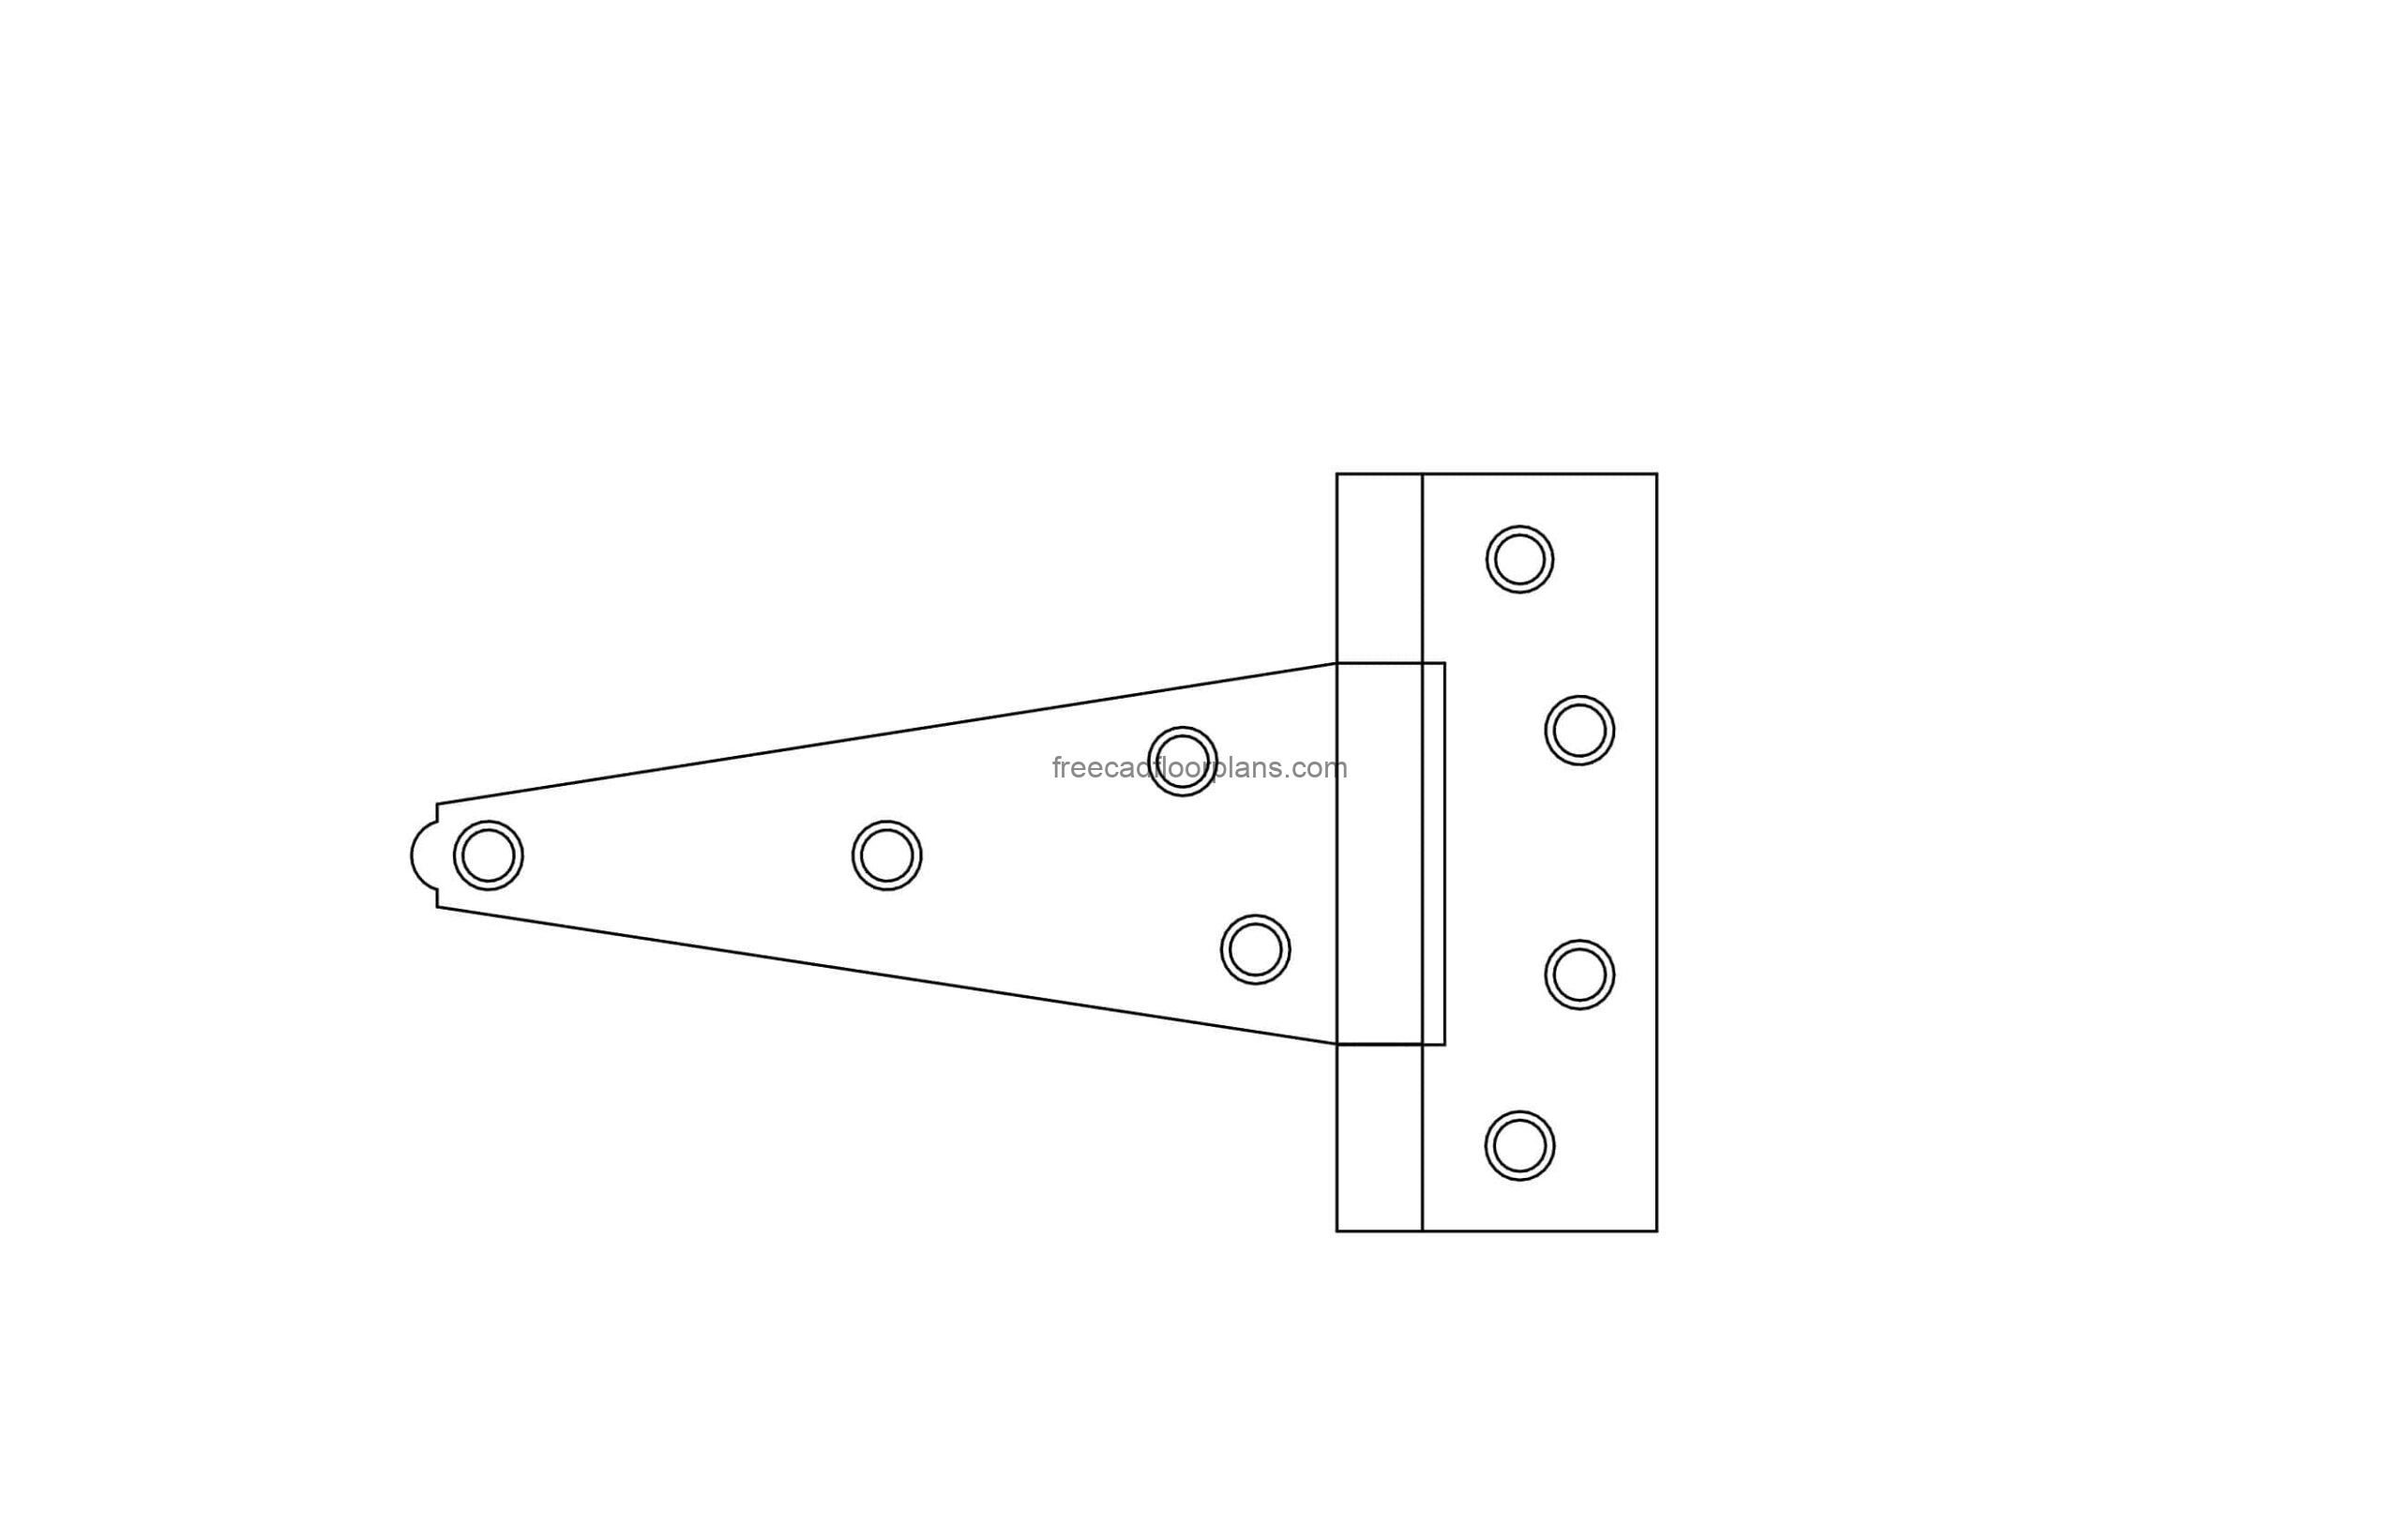 dwg cad block of a gate hinge drawing for free download